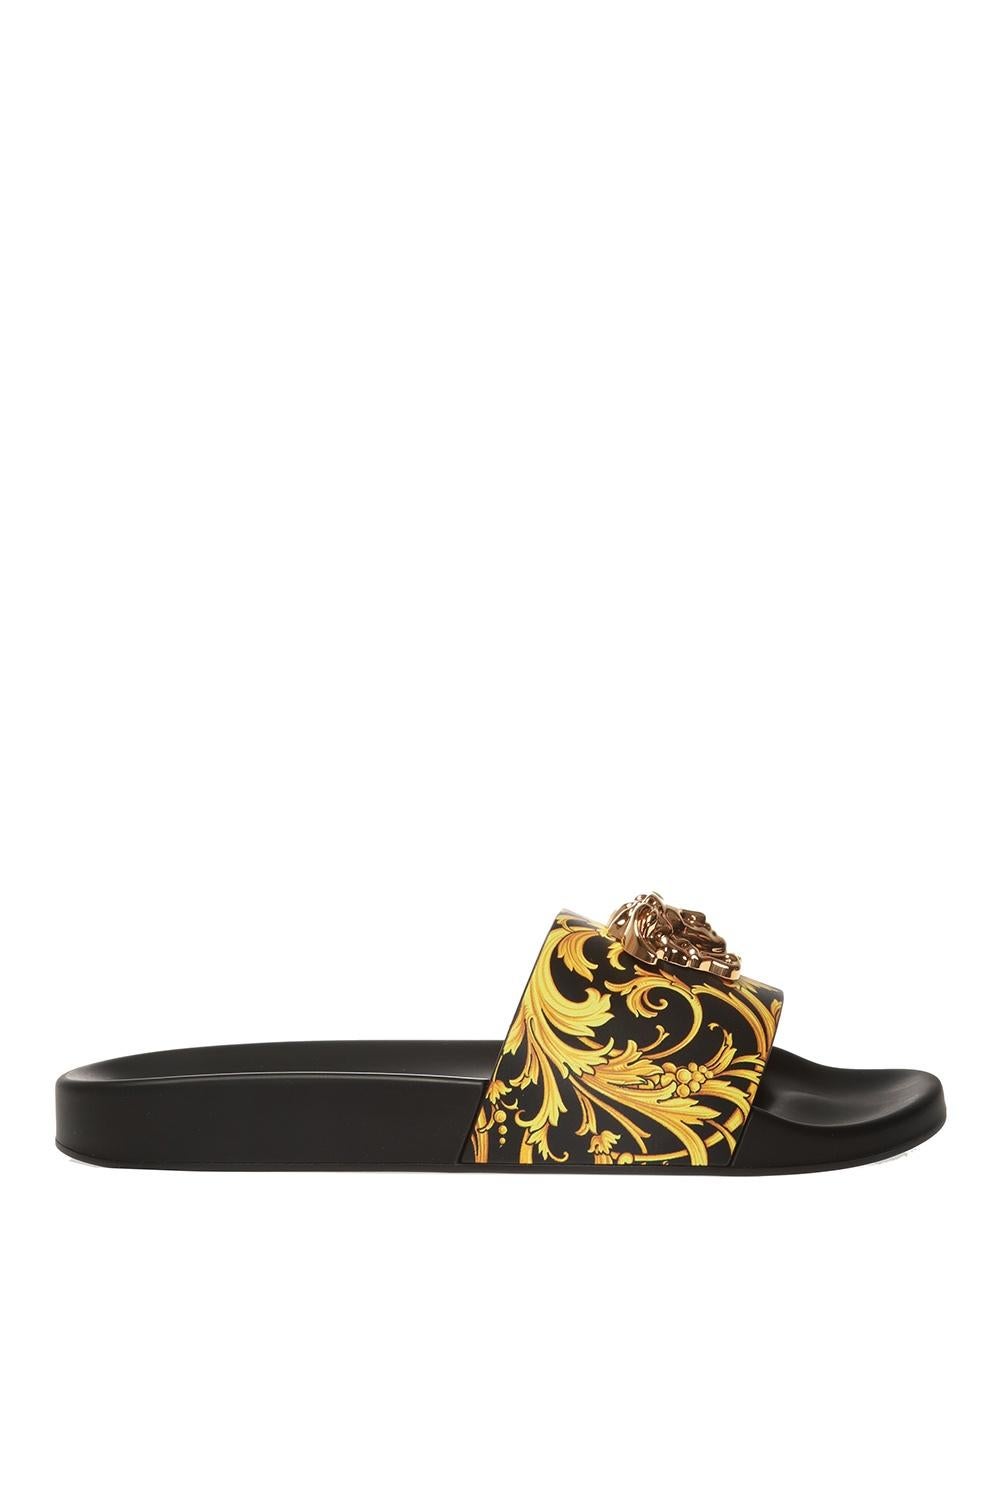 Versace Black and Gold Barocco Medusa Embellished Slides

These Versace Barocco Medusa slides will embellish your feet with the true baroque essence. In black leather and rubber, it has an intricate Barocco print on the strap, which is embellished